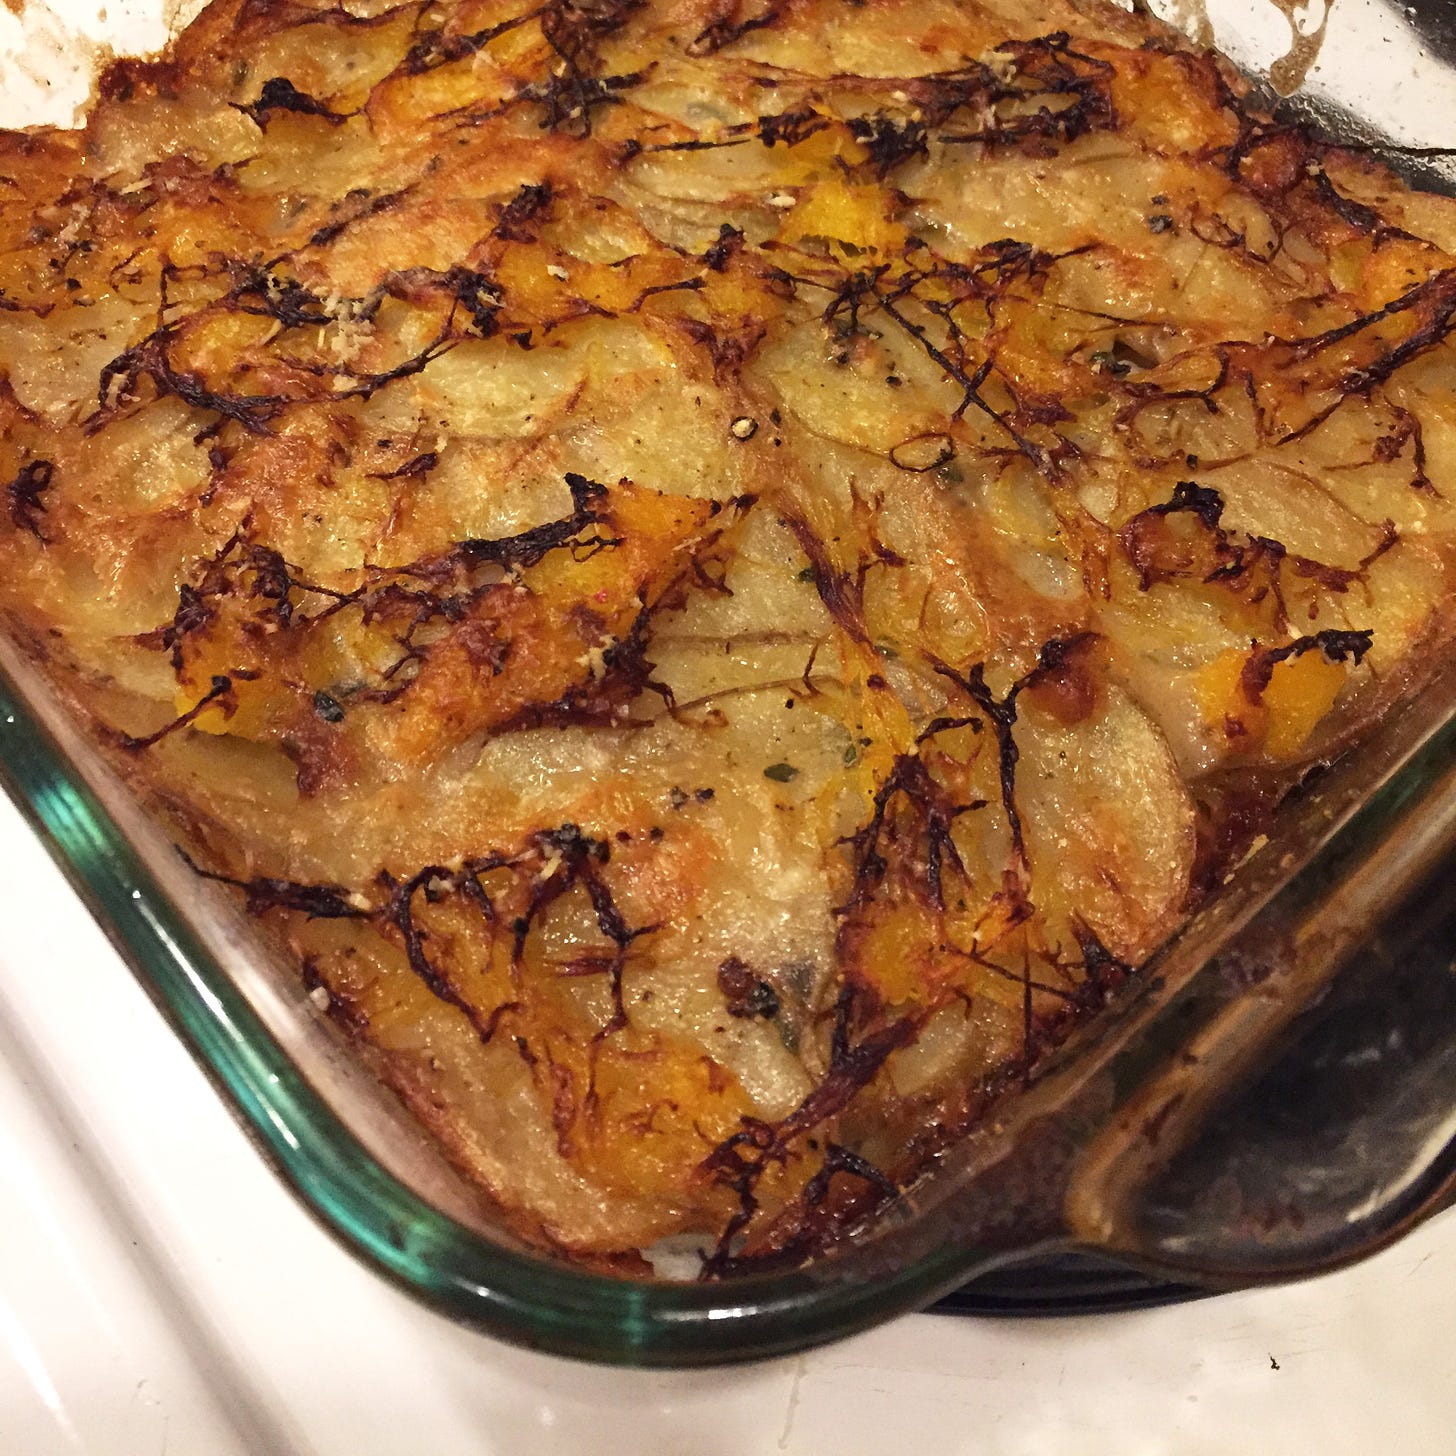 a square Pyrex pan full of a gratin made of thinly sliced potatoes and spaghetti squash. The top is charred in places and the edges have browned.